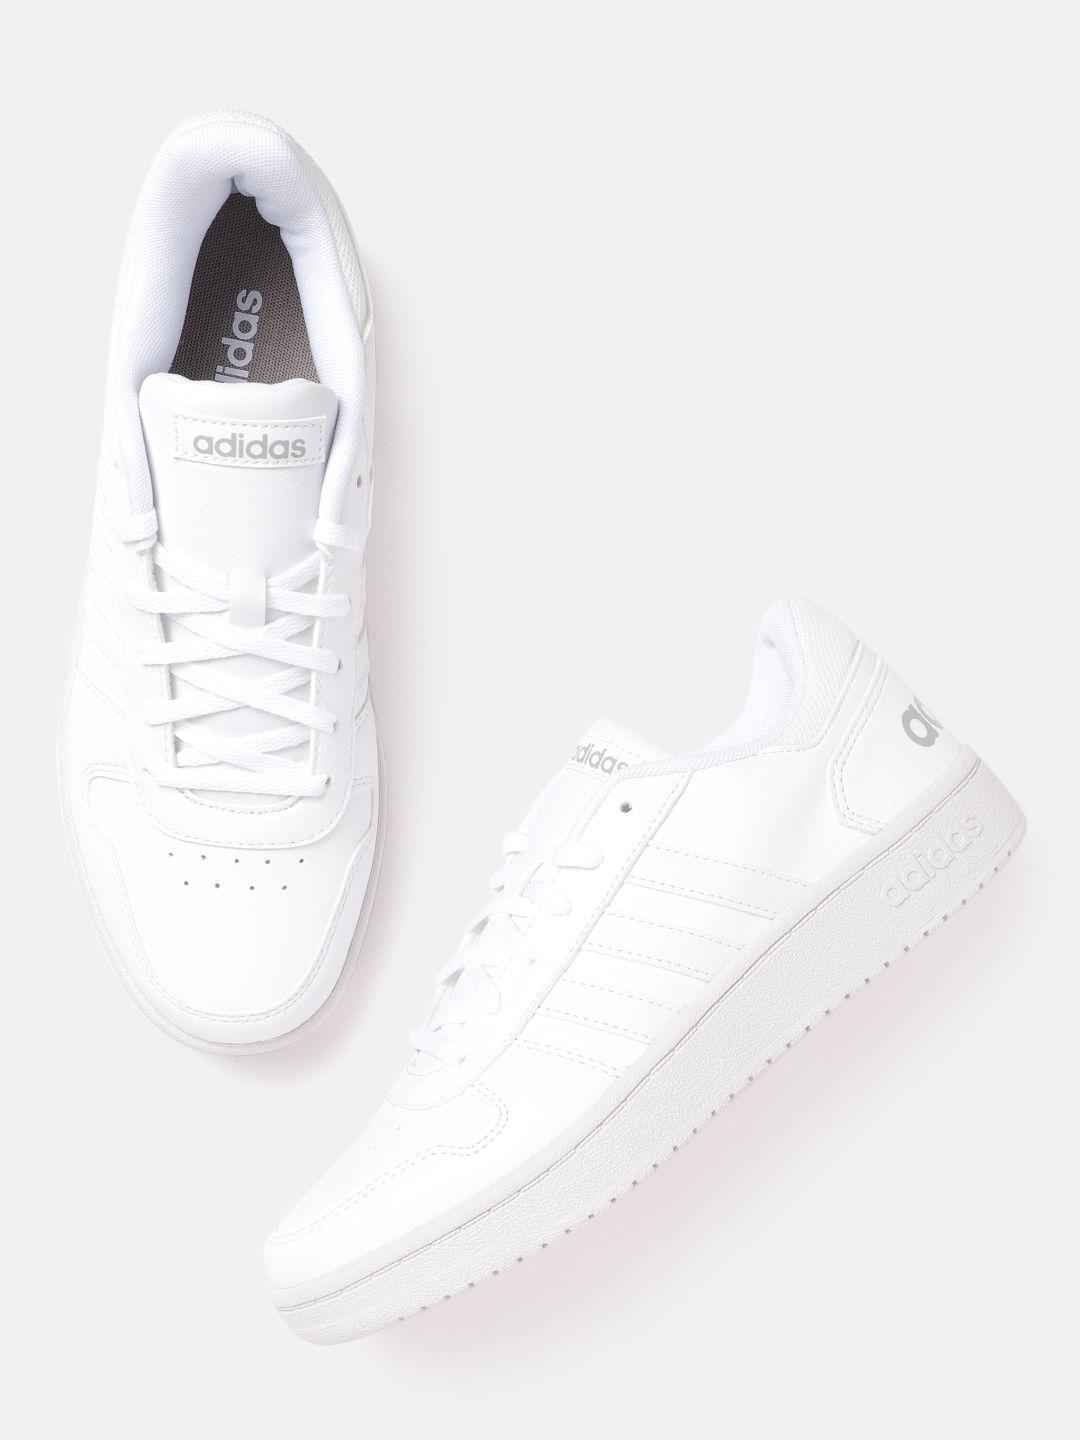 adidas women white solid hoops 2.0 basketball inspired sneakers with perforation detail